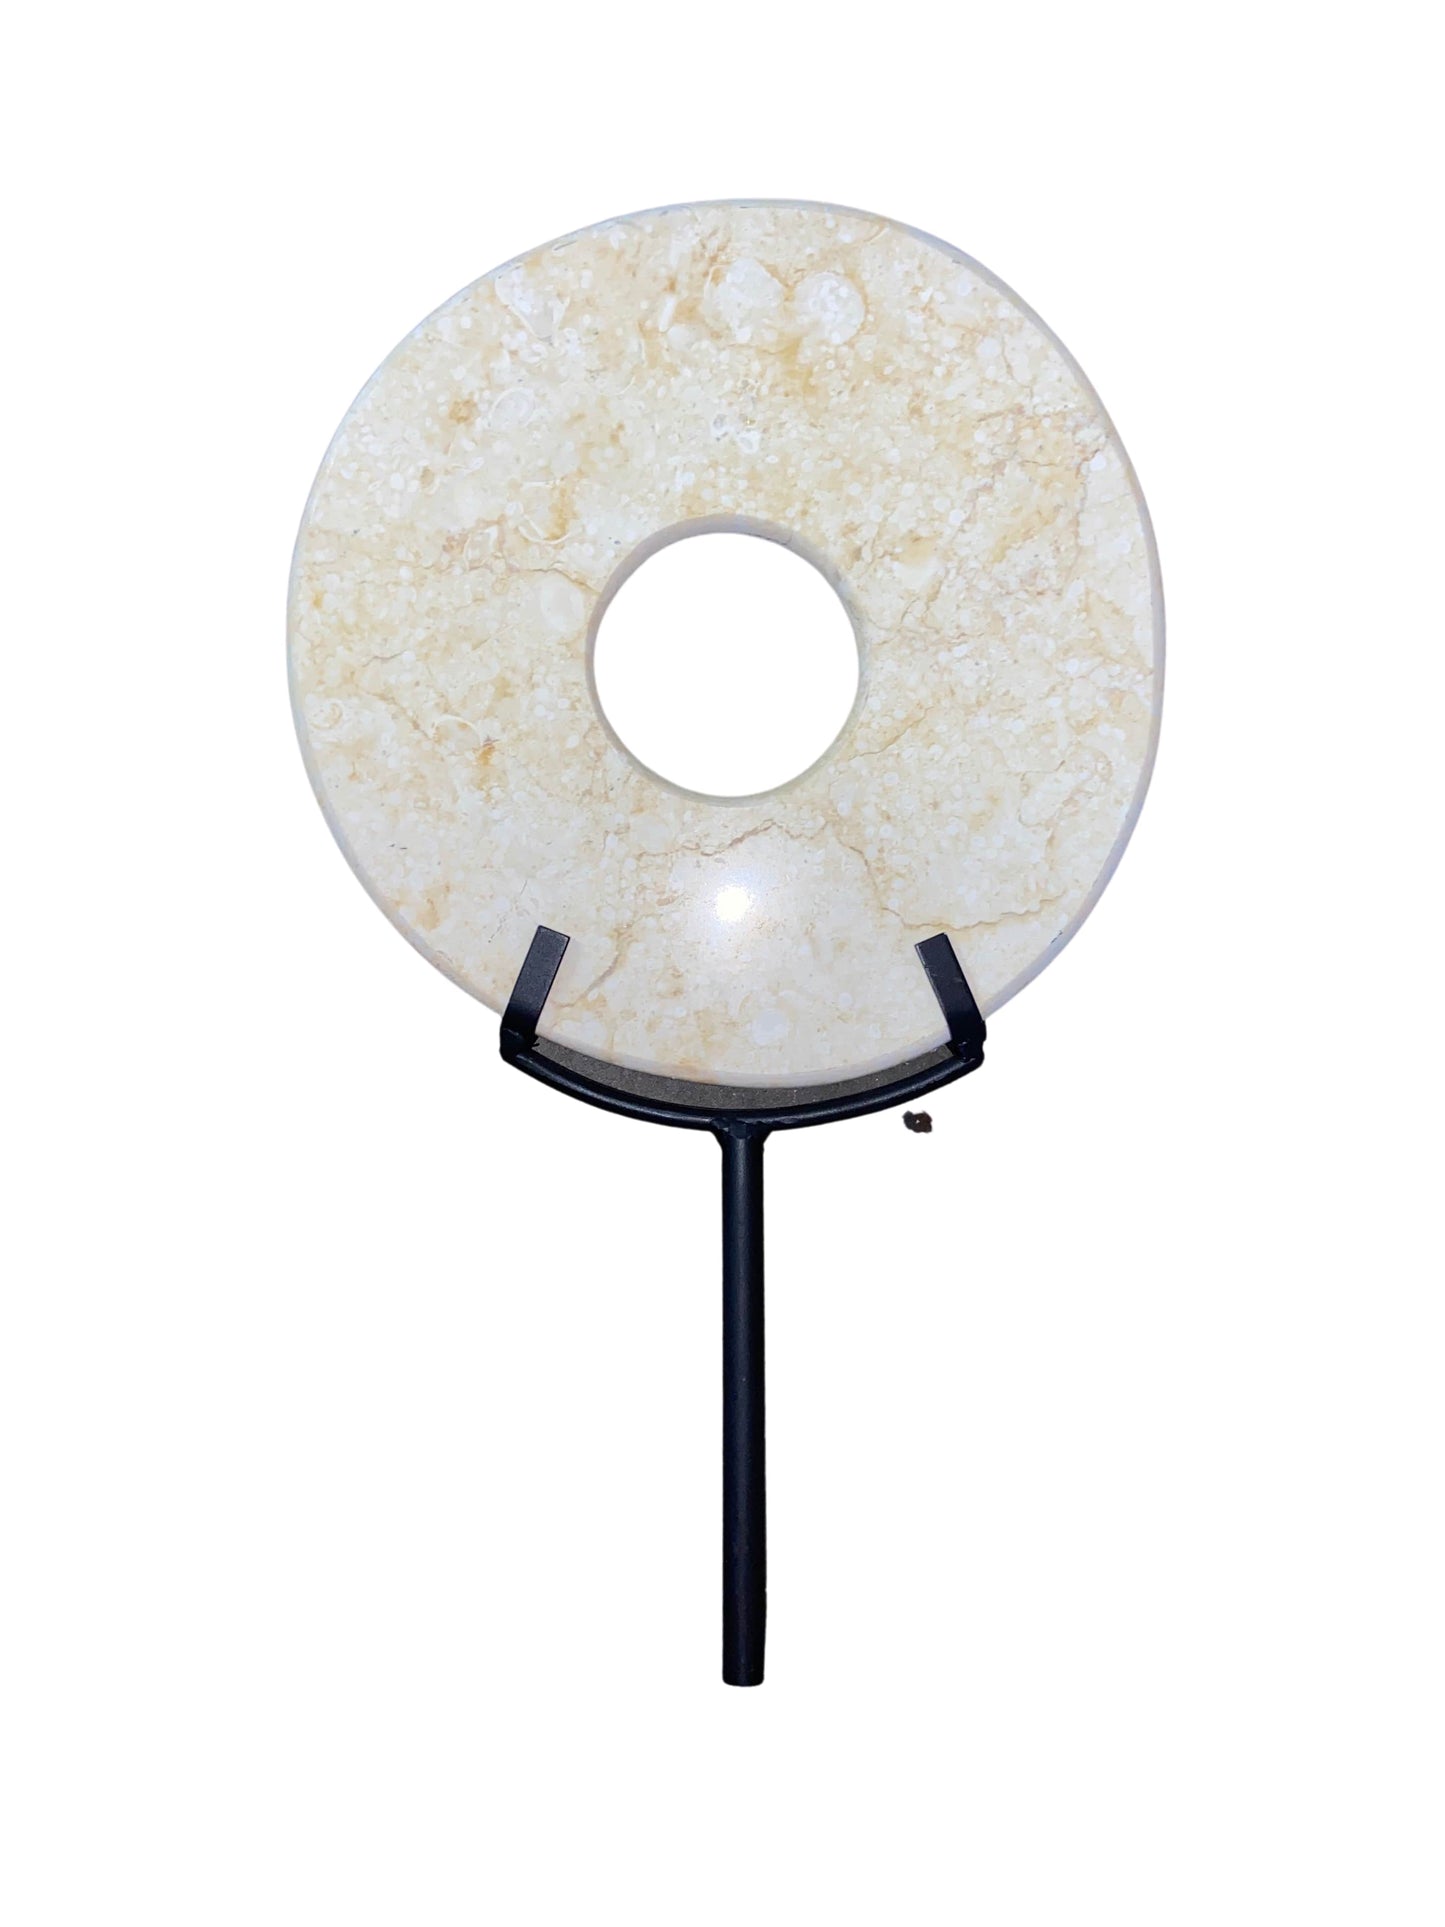 SILICON VALLEY: Gavin Belson's Large Marble Disk on Stand